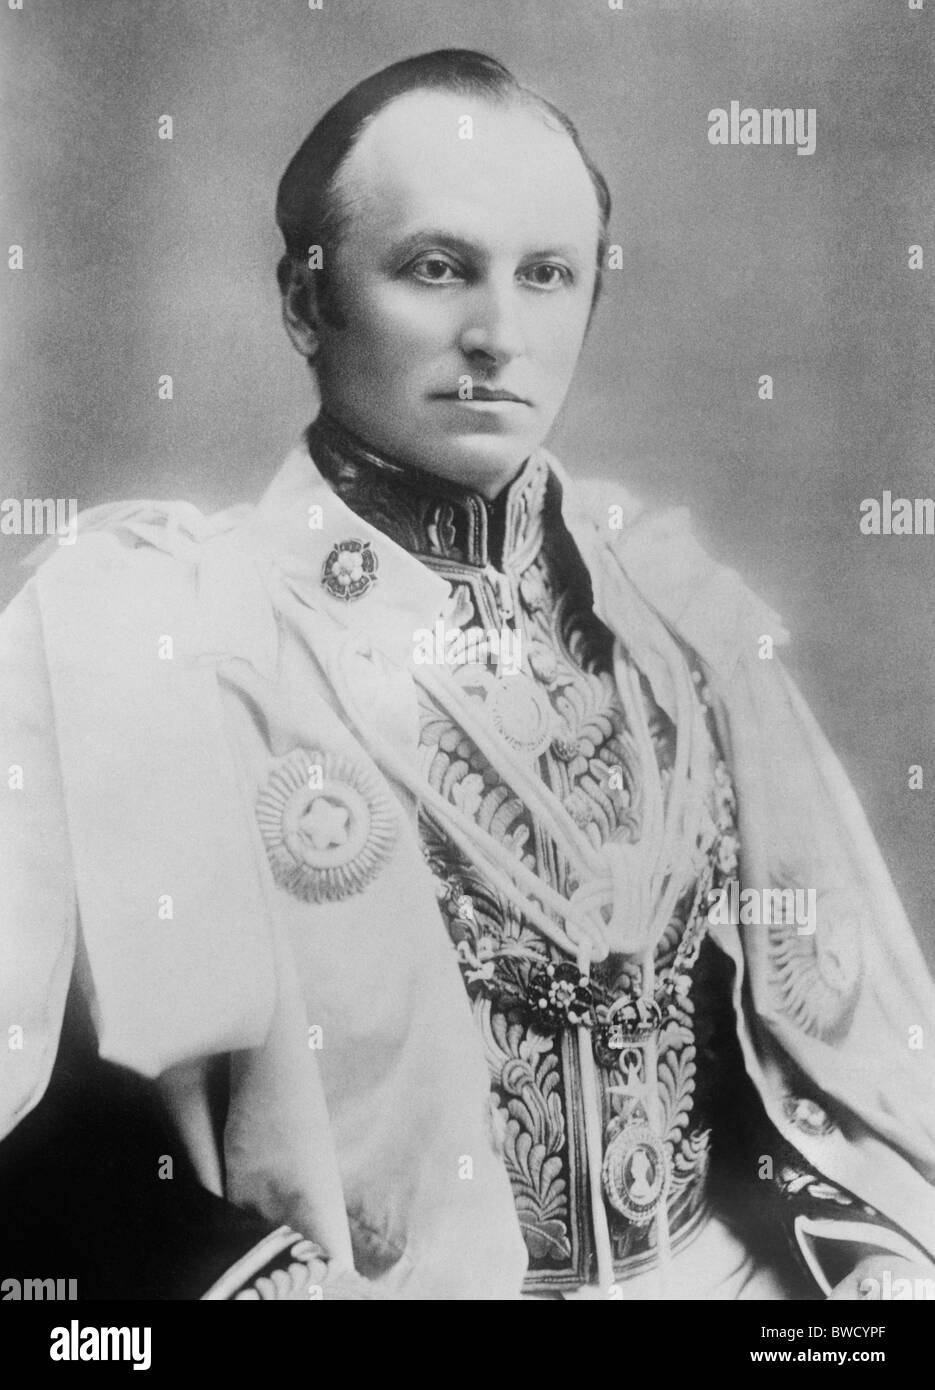 Vintage portrait photo c1900 of Lord Curzon (George Curzon, 1st Marquess Curzon of Kedleston) as Viceroy of India (1899 - 1905). Stock Photo